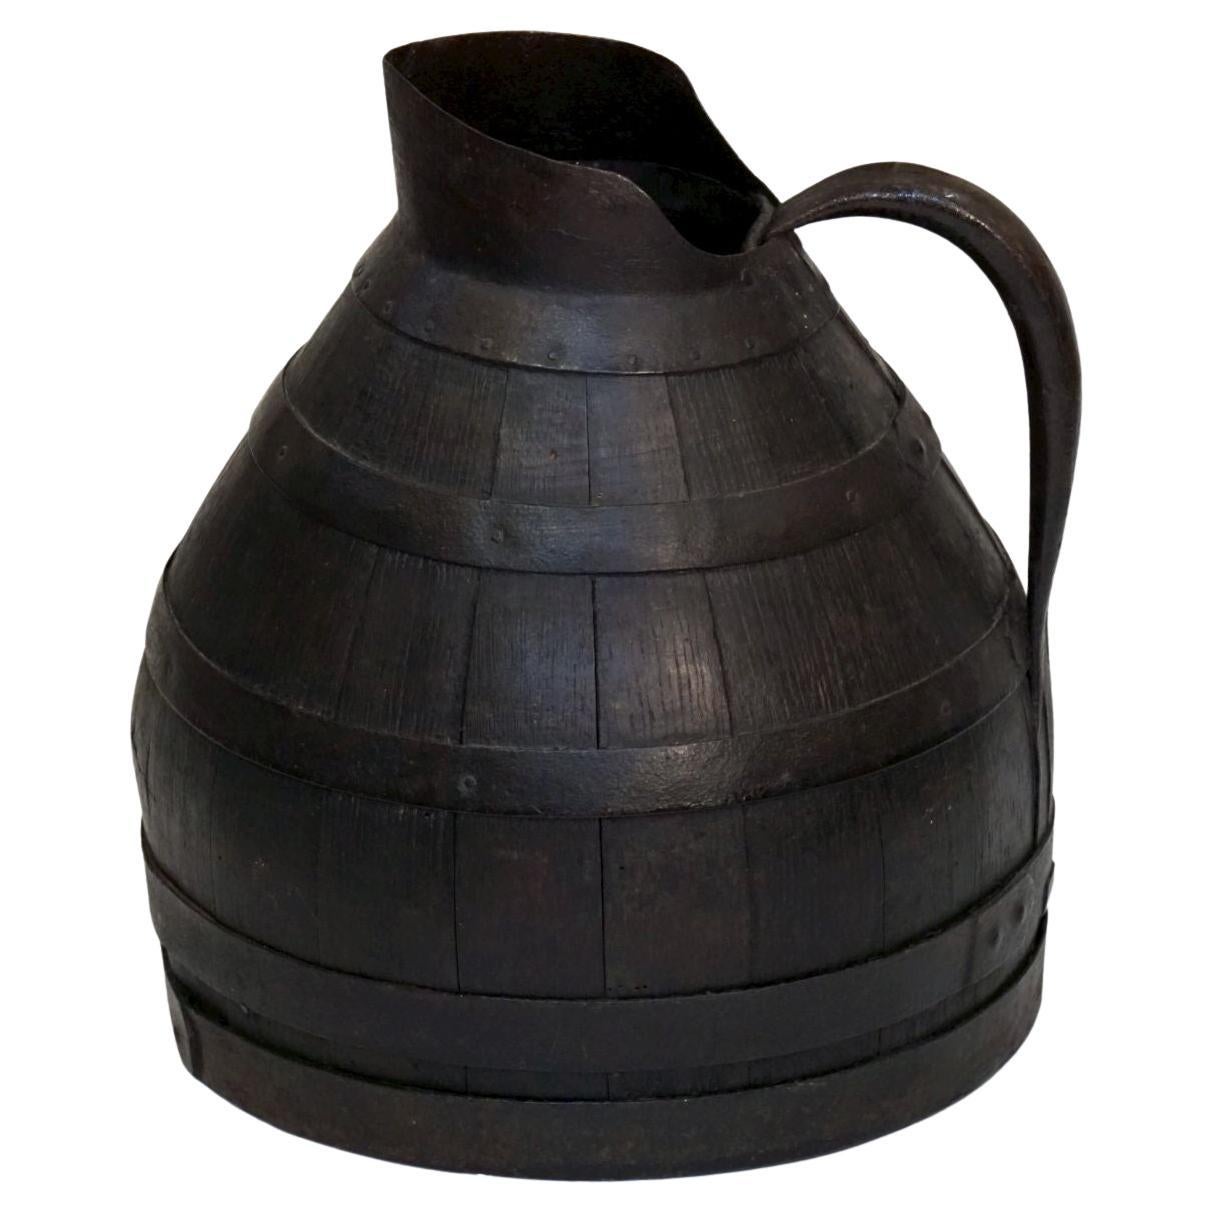 Large Metal-Bound Wooden Burgundy Wine Pitcher from France